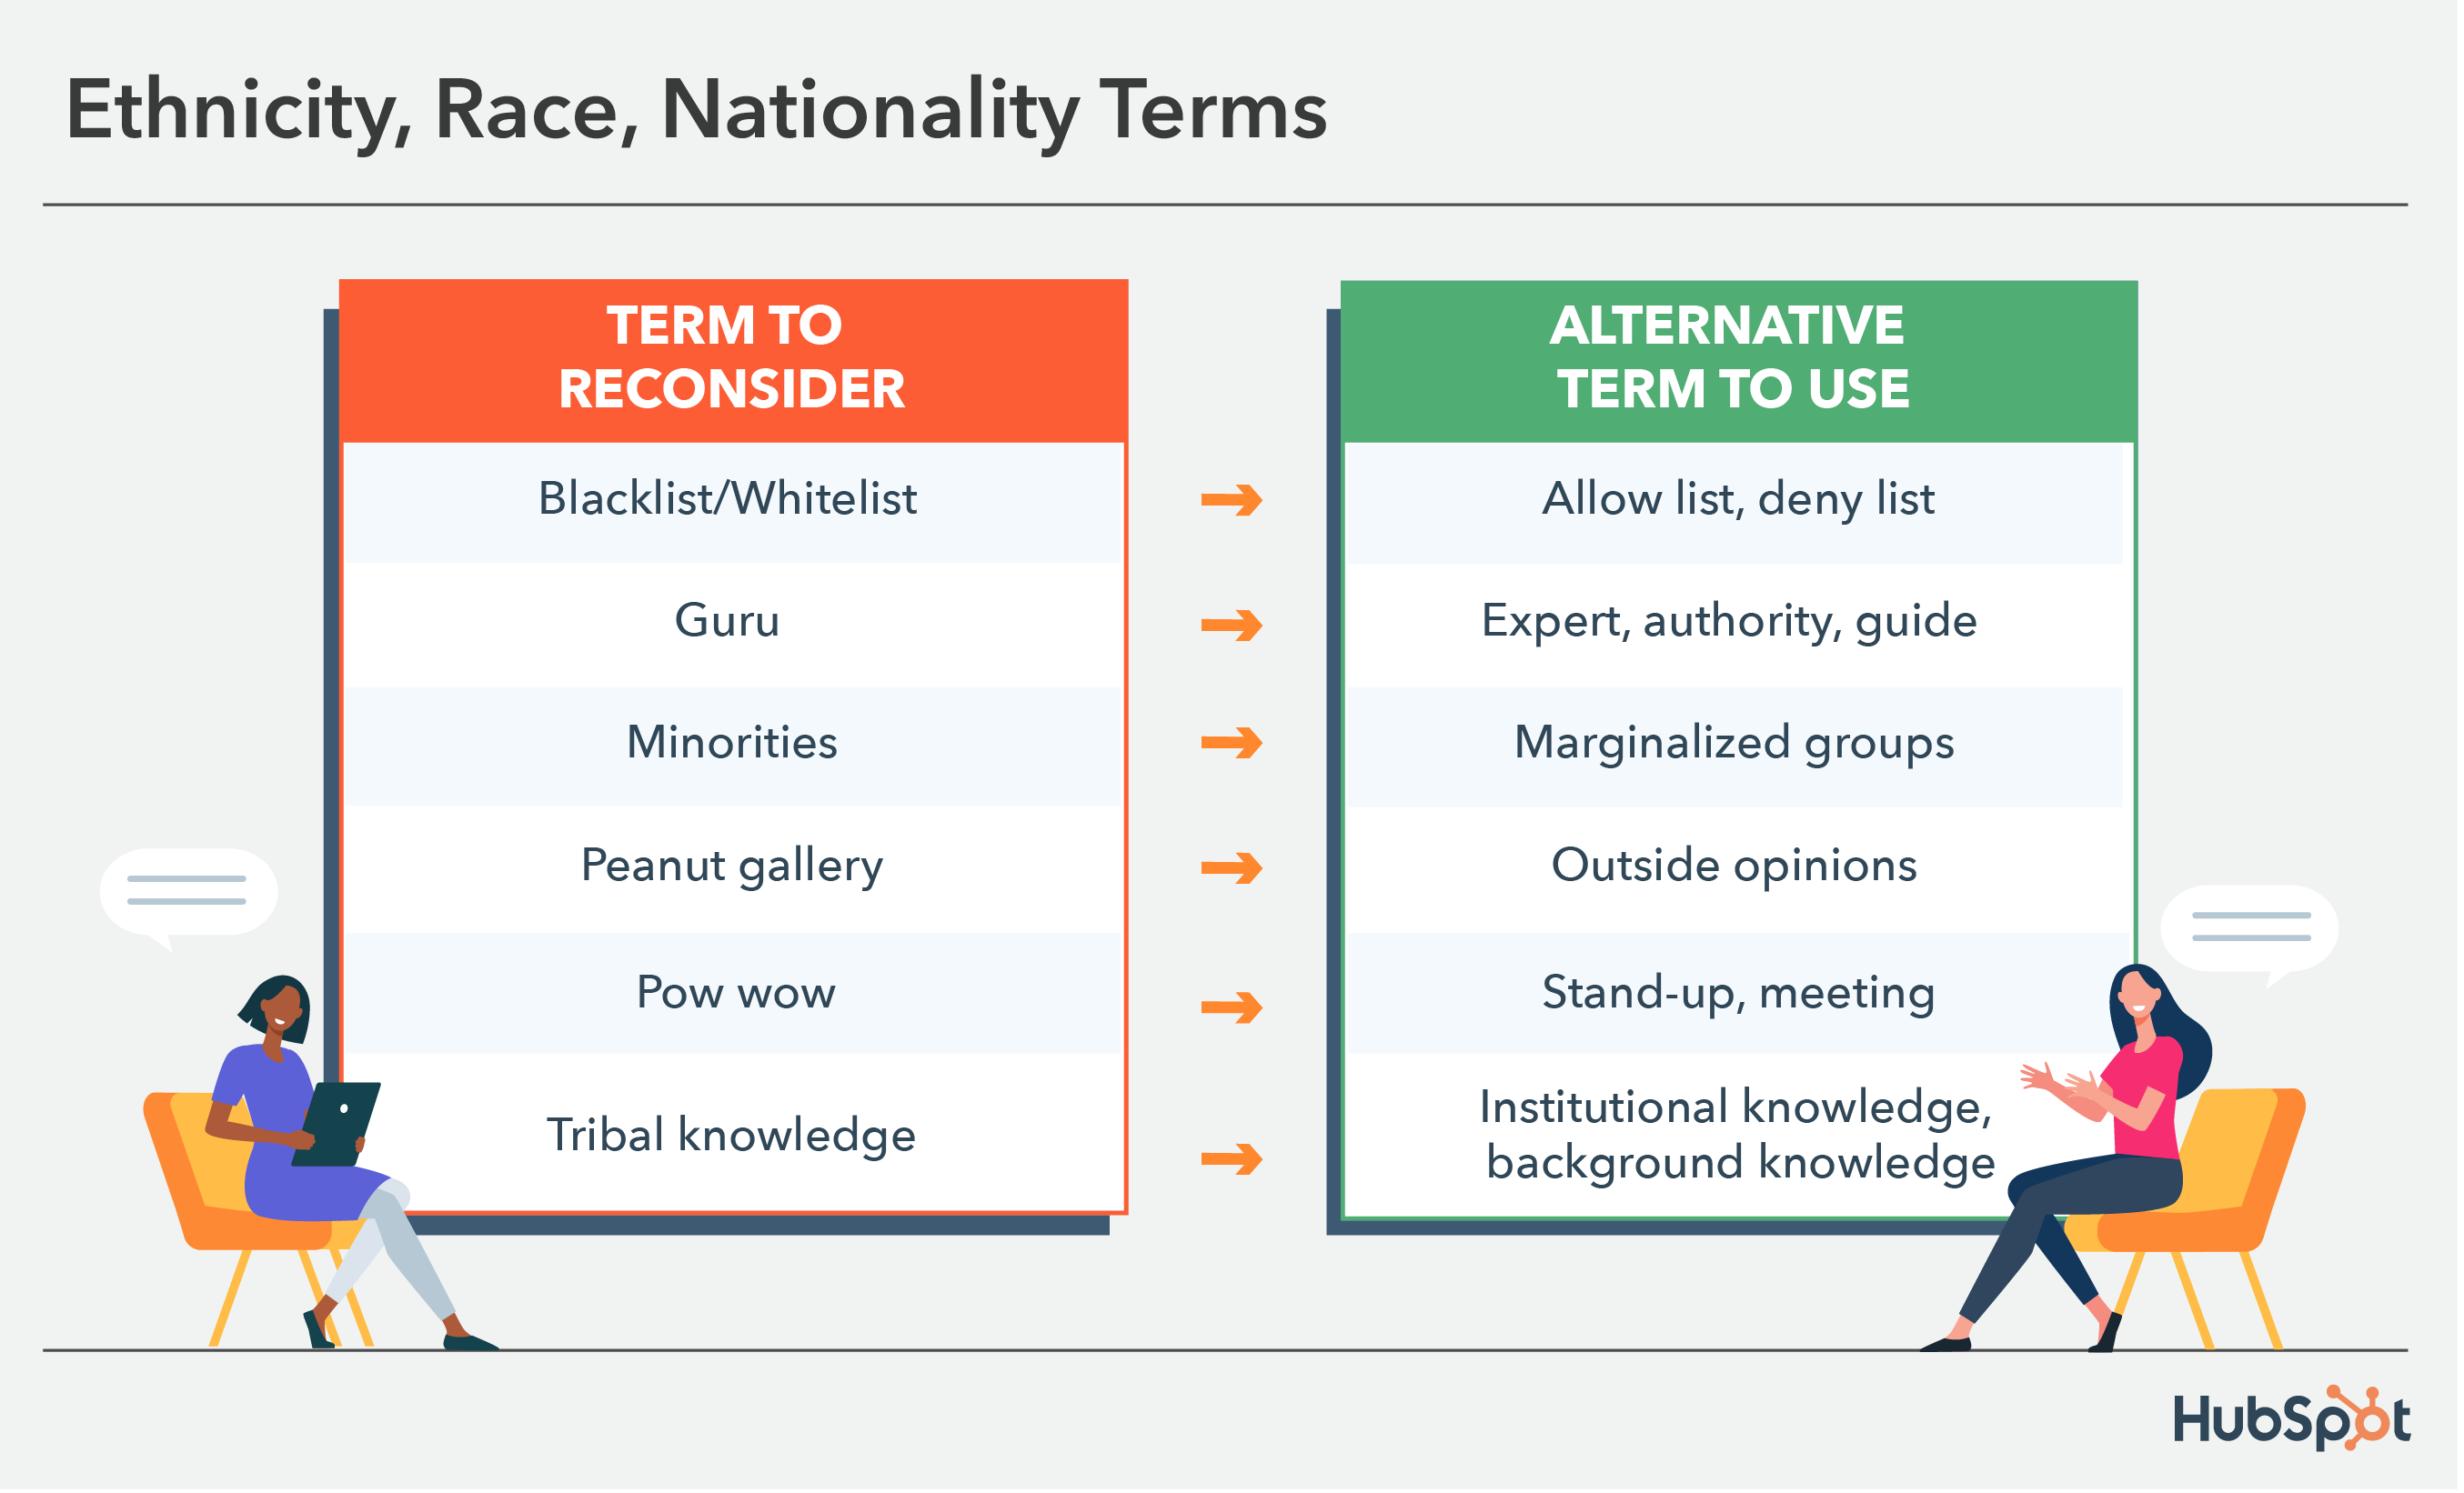 examples of racial groups